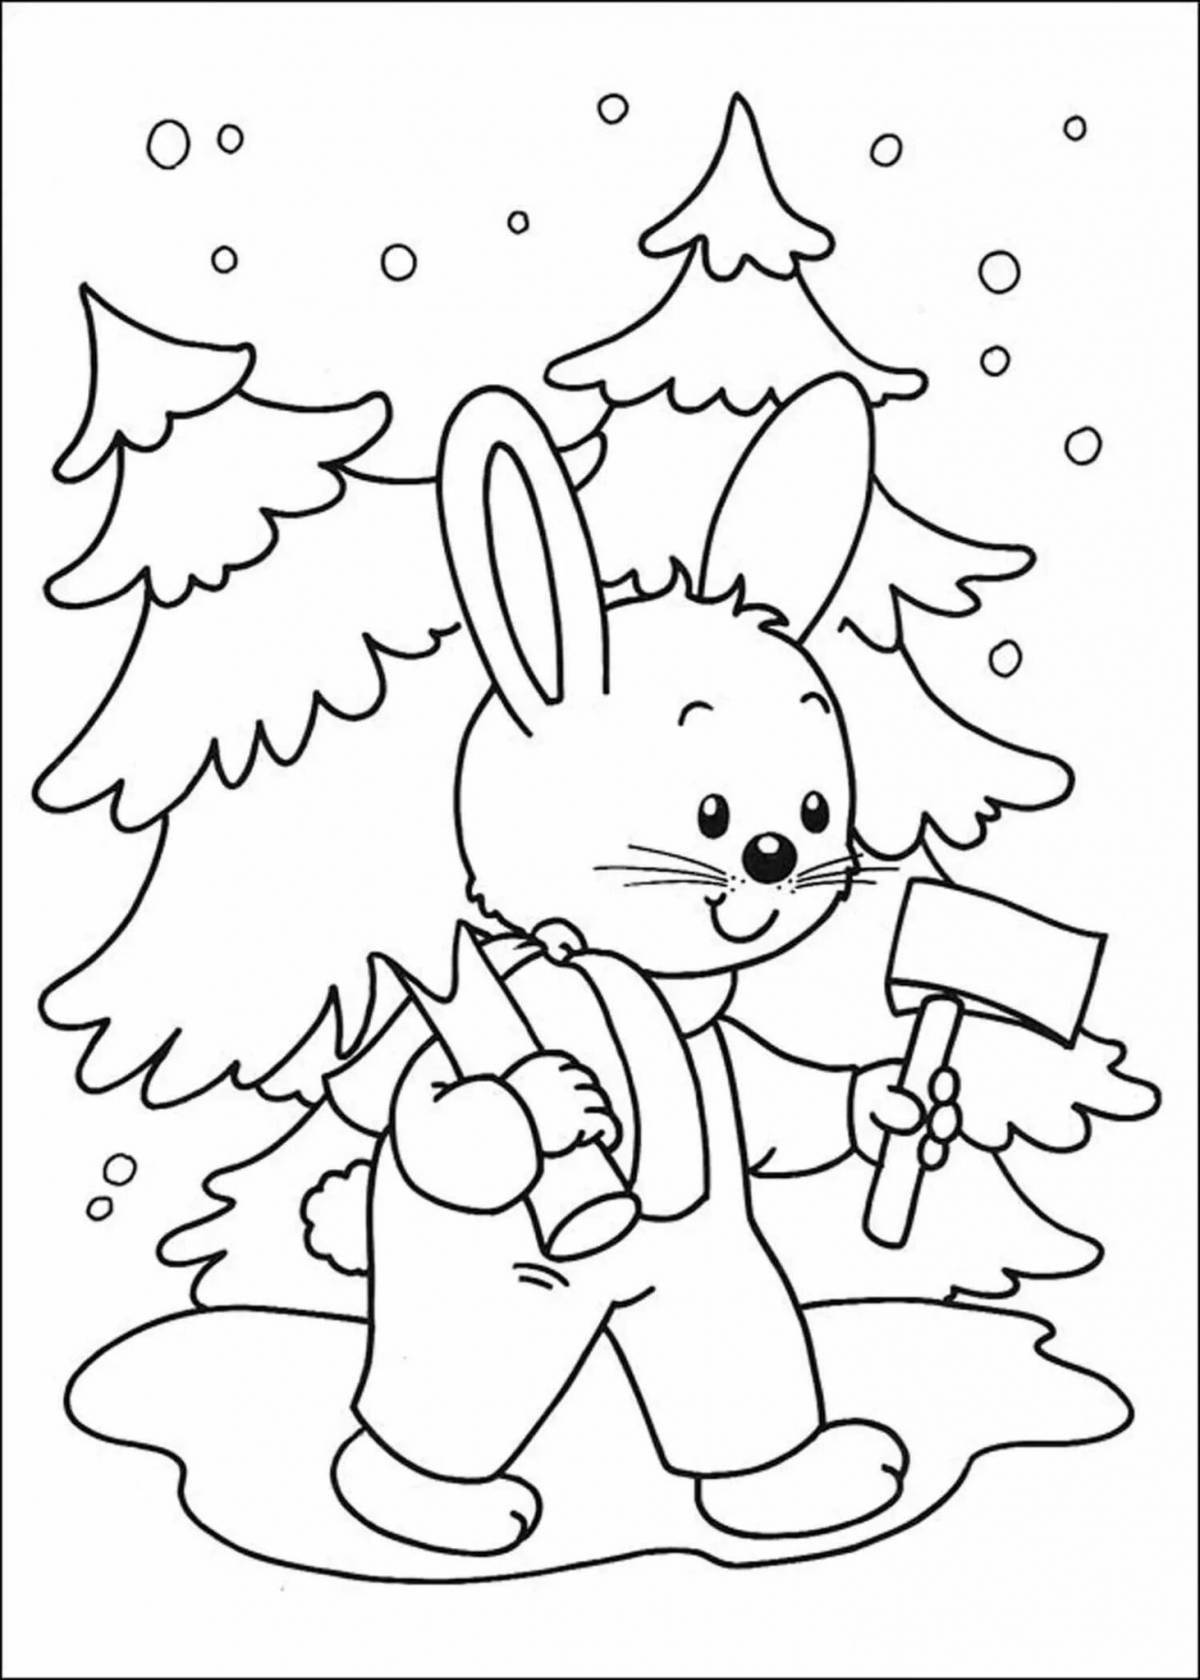 Exotic winter coloring book for children 3-4 years old